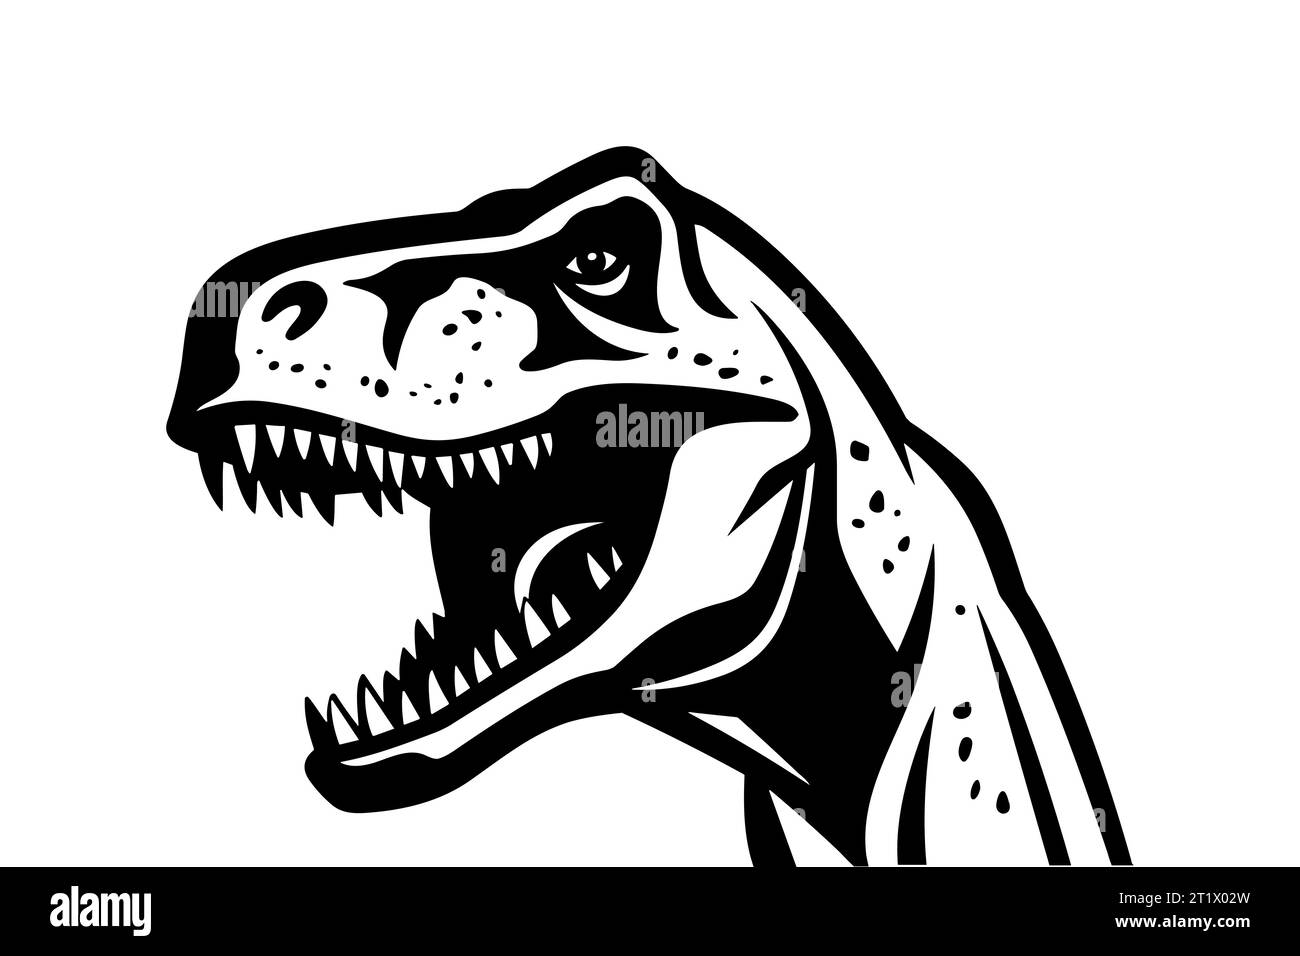 Vector Black and White Tyrannosaurus Rex Head Icon, Cutout Silhouette Illustration, Design Template for T-Shirt Printing, Textile, Stickers, Art etc Stock Vector